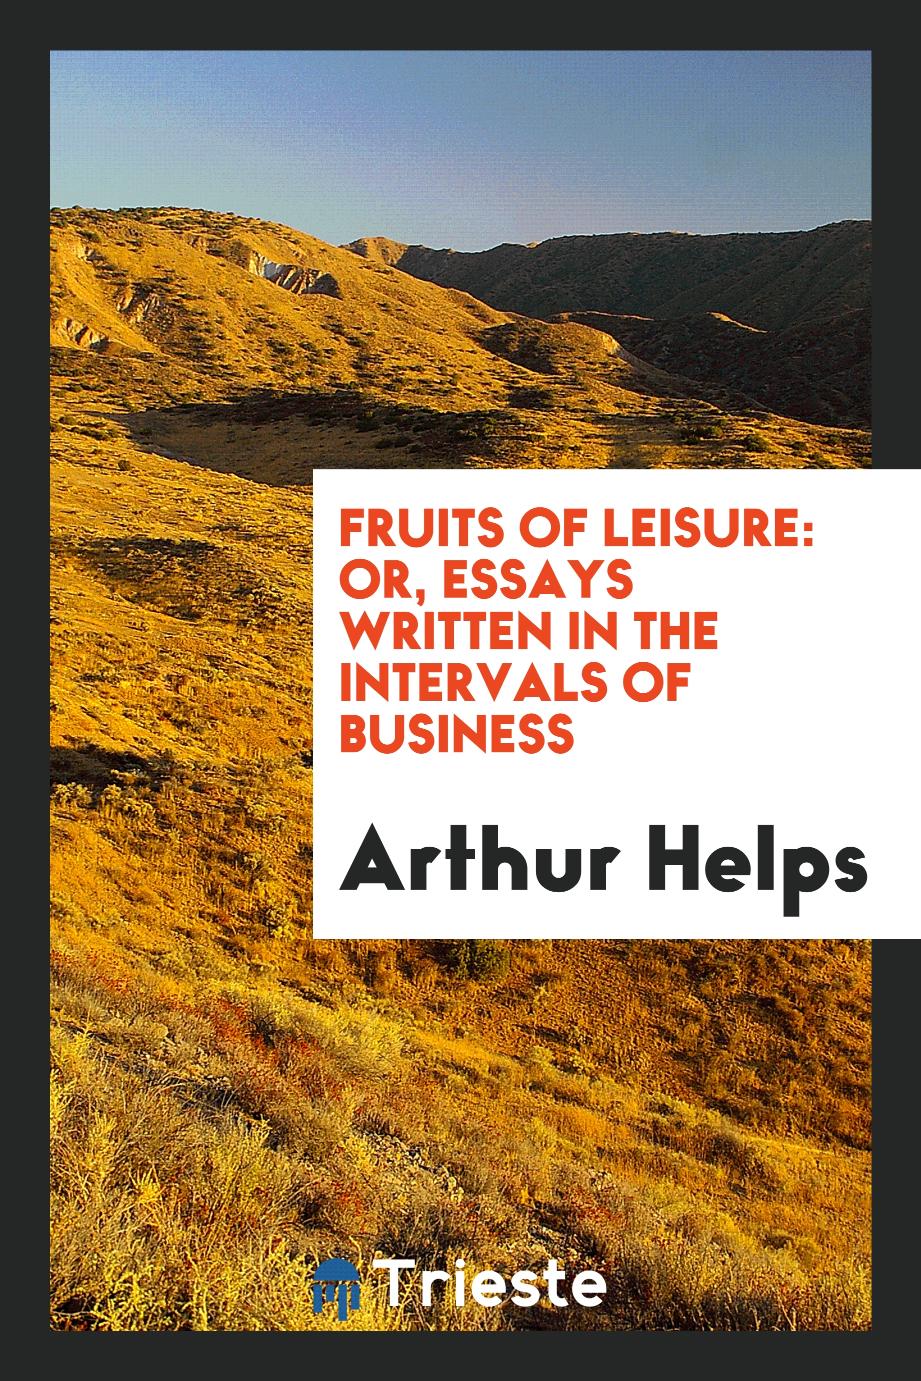 Fruits of Leisure: Or, Essays Written in the Intervals of Business